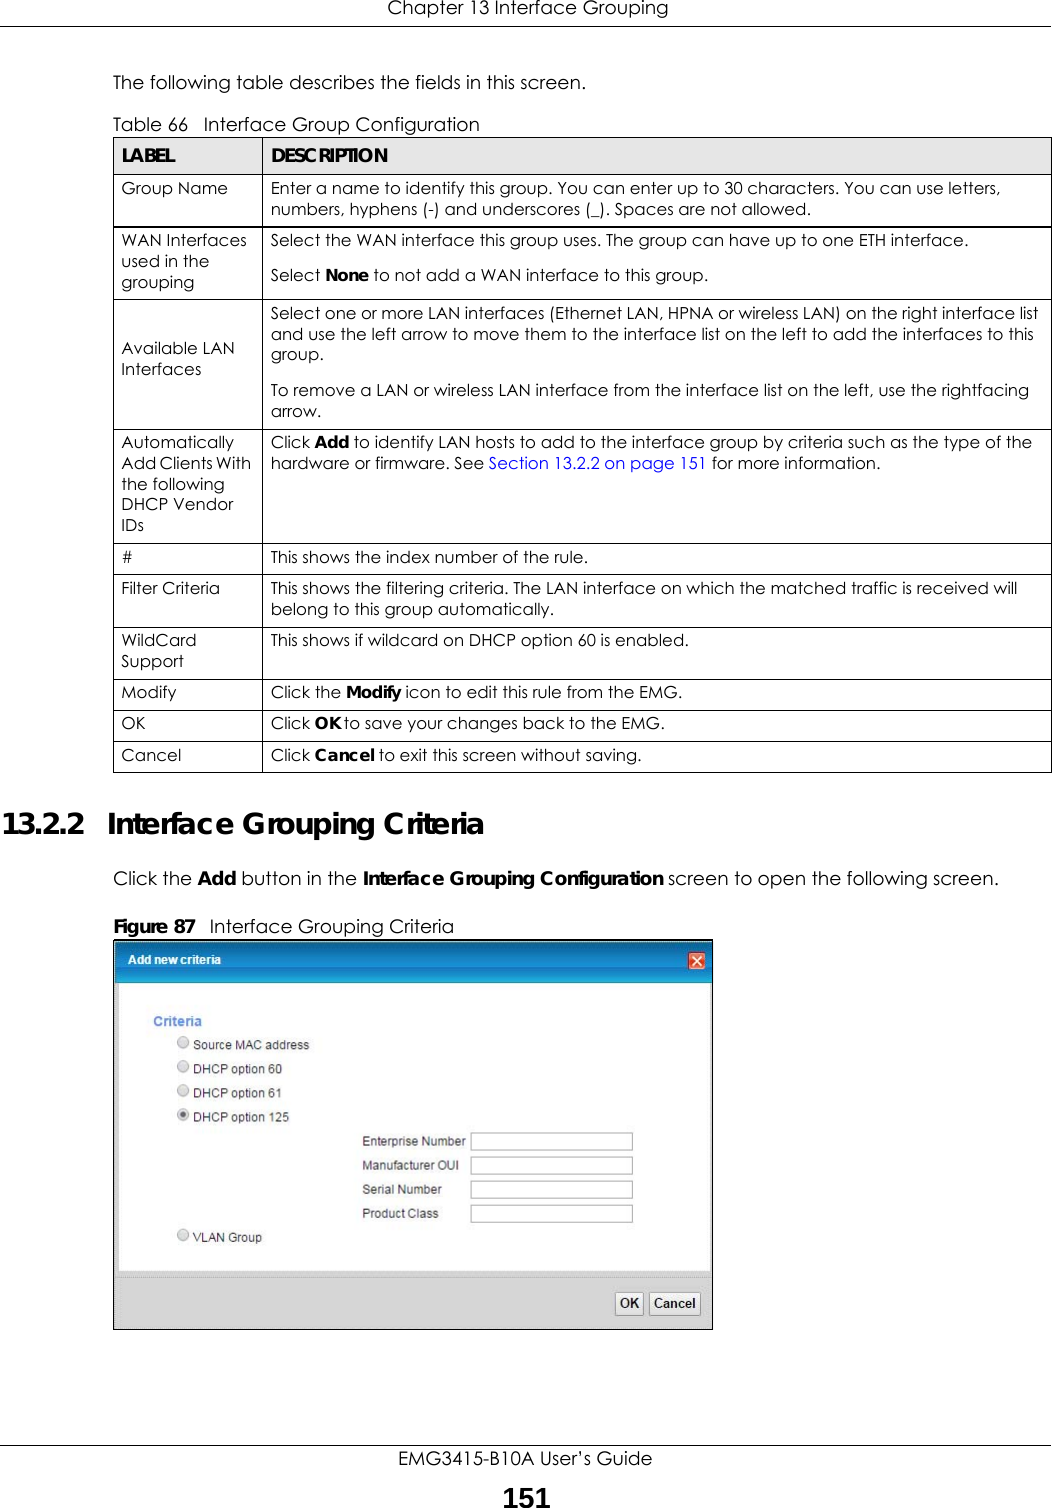  Chapter 13 Interface GroupingEMG3415-B10A User’s Guide151The following table describes the fields in this screen. 13.2.2   Interface Grouping CriteriaClick the Add button in the Interface Grouping Configuration screen to open the following screen.Figure 87   Interface Grouping Criteria Table 66   Interface Group ConfigurationLABEL DESCRIPTIONGroup Name Enter a name to identify this group. You can enter up to 30 characters. You can use letters, numbers, hyphens (-) and underscores (_). Spaces are not allowed.WAN Interfaces used in the groupingSelect the WAN interface this group uses. The group can have up to one ETH interface.Select None to not add a WAN interface to this group.Available LAN InterfacesSelect one or more LAN interfaces (Ethernet LAN, HPNA or wireless LAN) on the right interface list and use the left arrow to move them to the interface list on the left to add the interfaces to this group.To remove a LAN or wireless LAN interface from the interface list on the left, use the rightfacing arrow.Automatically Add Clients With the following DHCP Vendor IDsClick Add to identify LAN hosts to add to the interface group by criteria such as the type of the hardware or firmware. See Section 13.2.2 on page 151 for more information.#This shows the index number of the rule.Filter Criteria This shows the filtering criteria. The LAN interface on which the matched traffic is received will belong to this group automatically.WildCard SupportThis shows if wildcard on DHCP option 60 is enabled.Modify Click the Modify icon to edit this rule from the EMG.OK Click OK to save your changes back to the EMG.Cancel Click Cancel to exit this screen without saving.